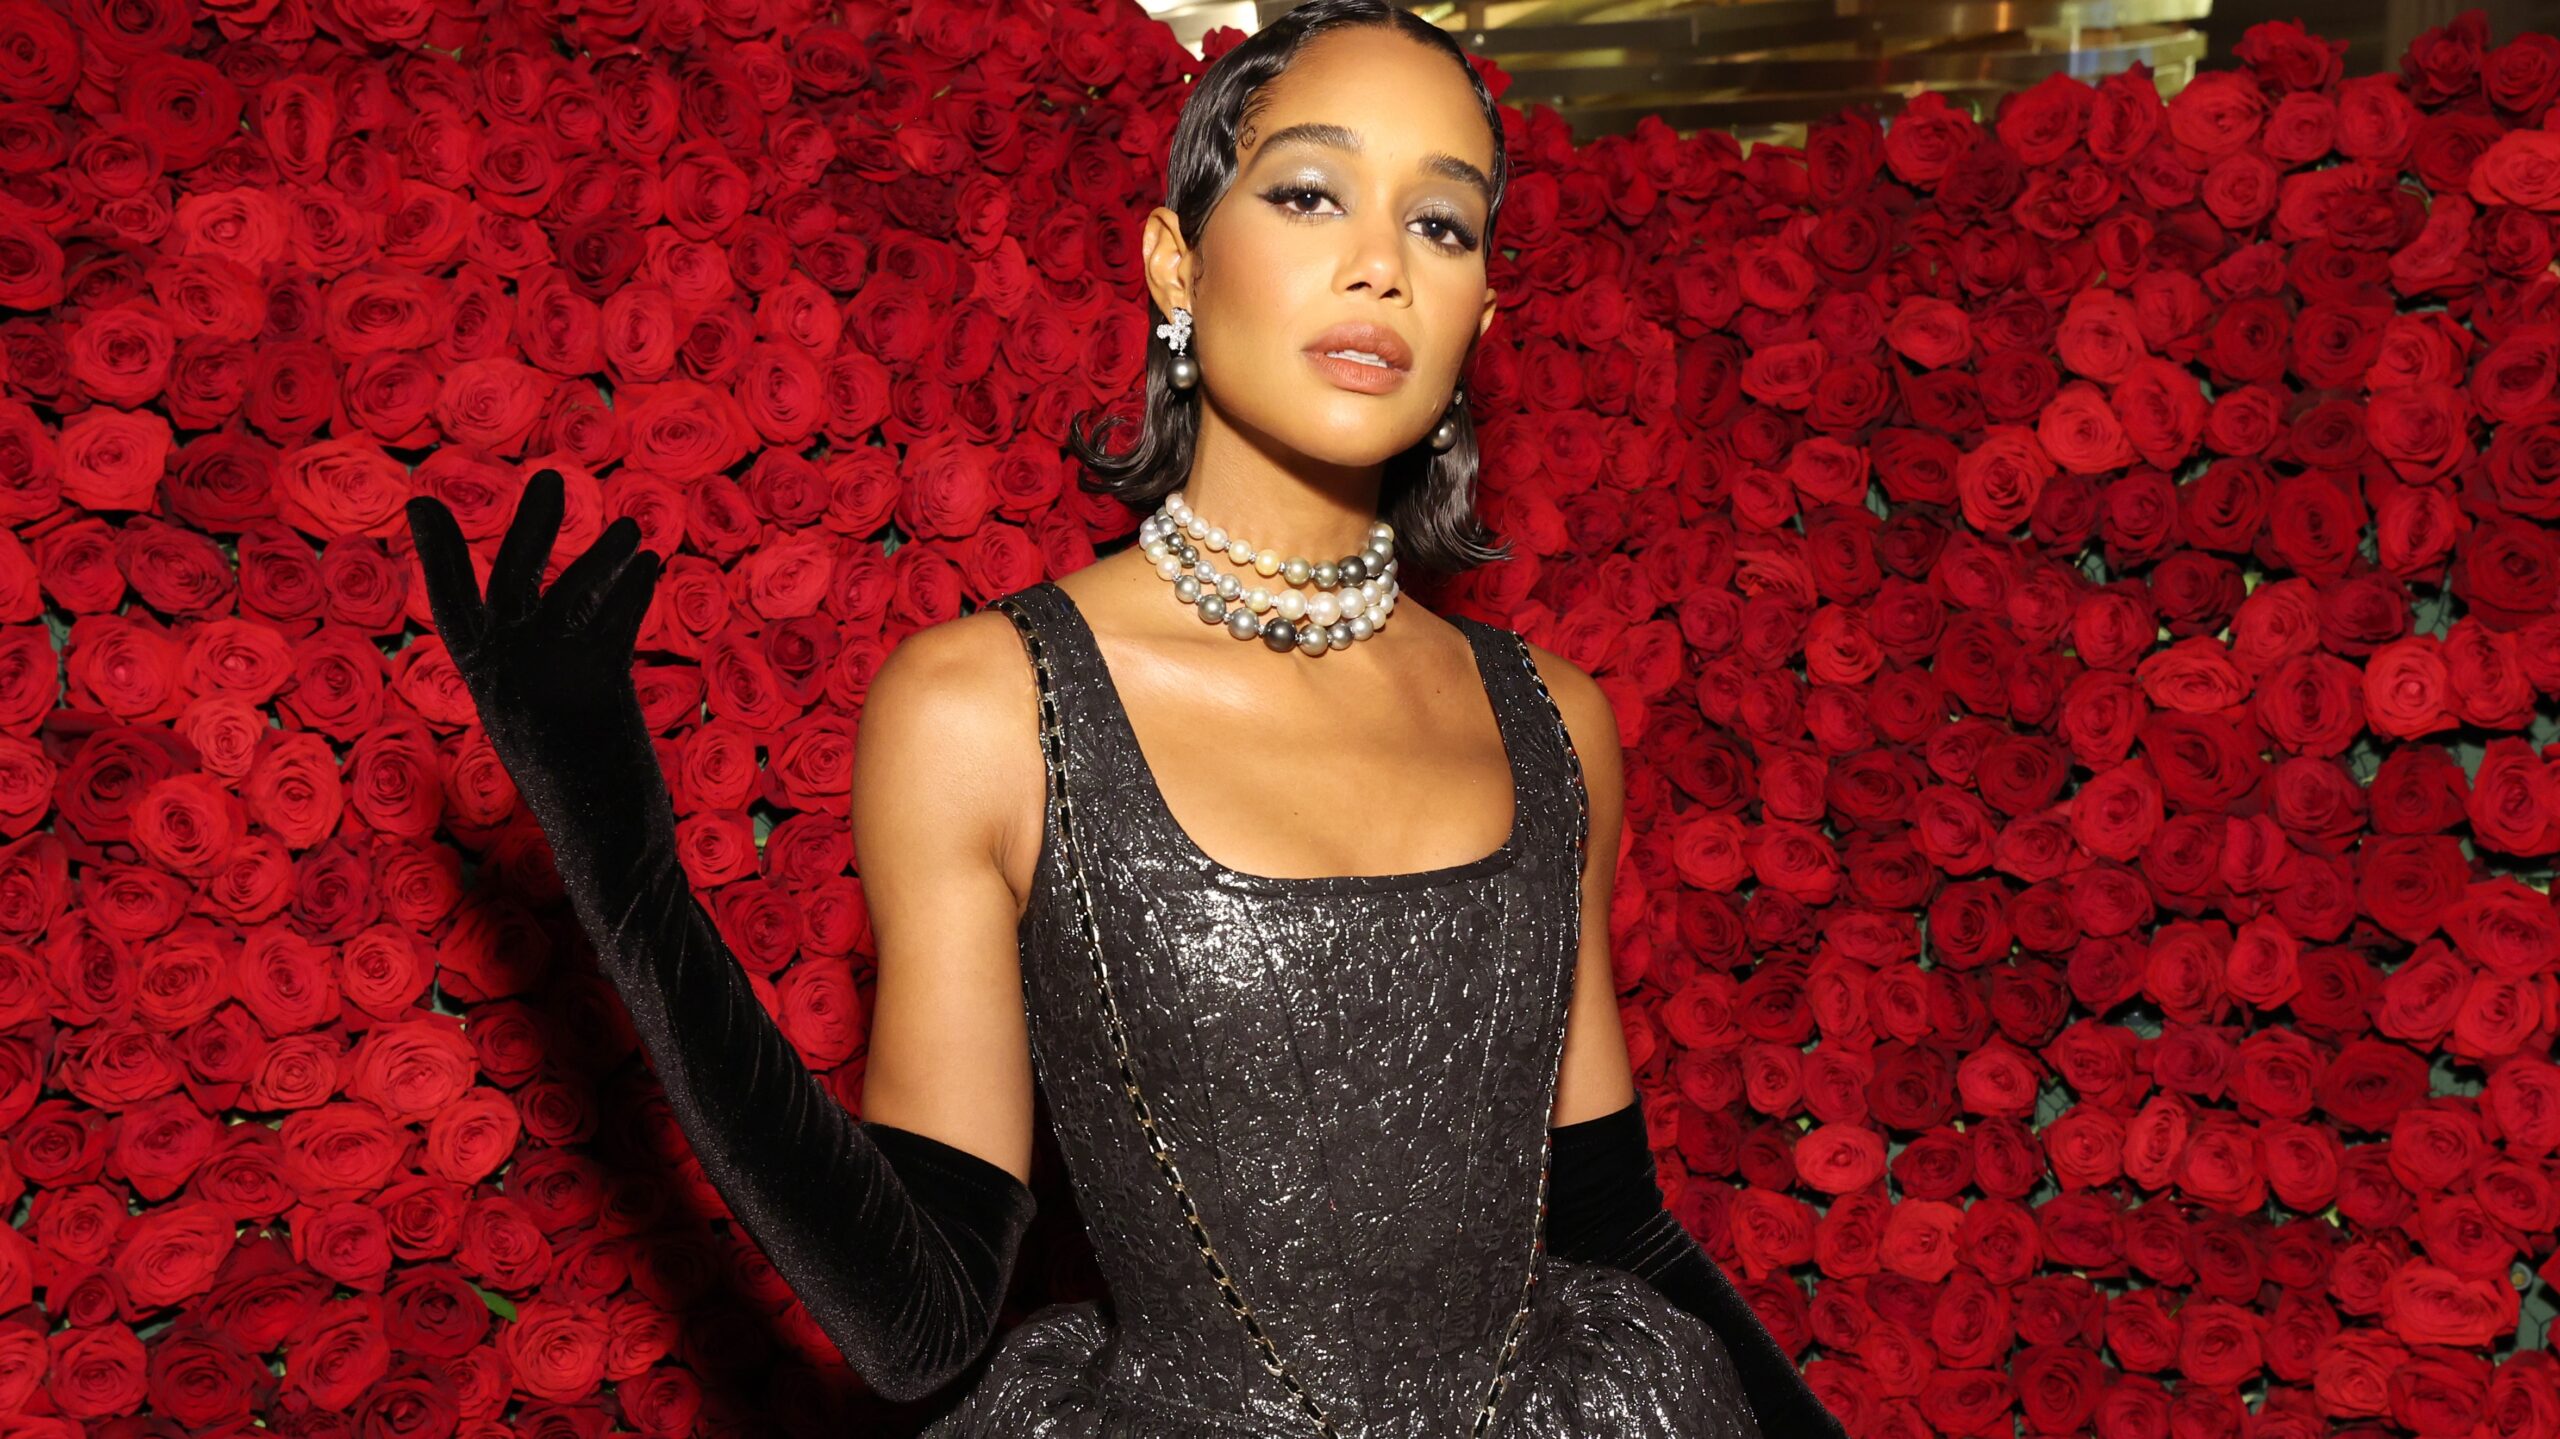 Laura Harrier Partnered With This Major Fashion Retailer For Her MET Gala Gown